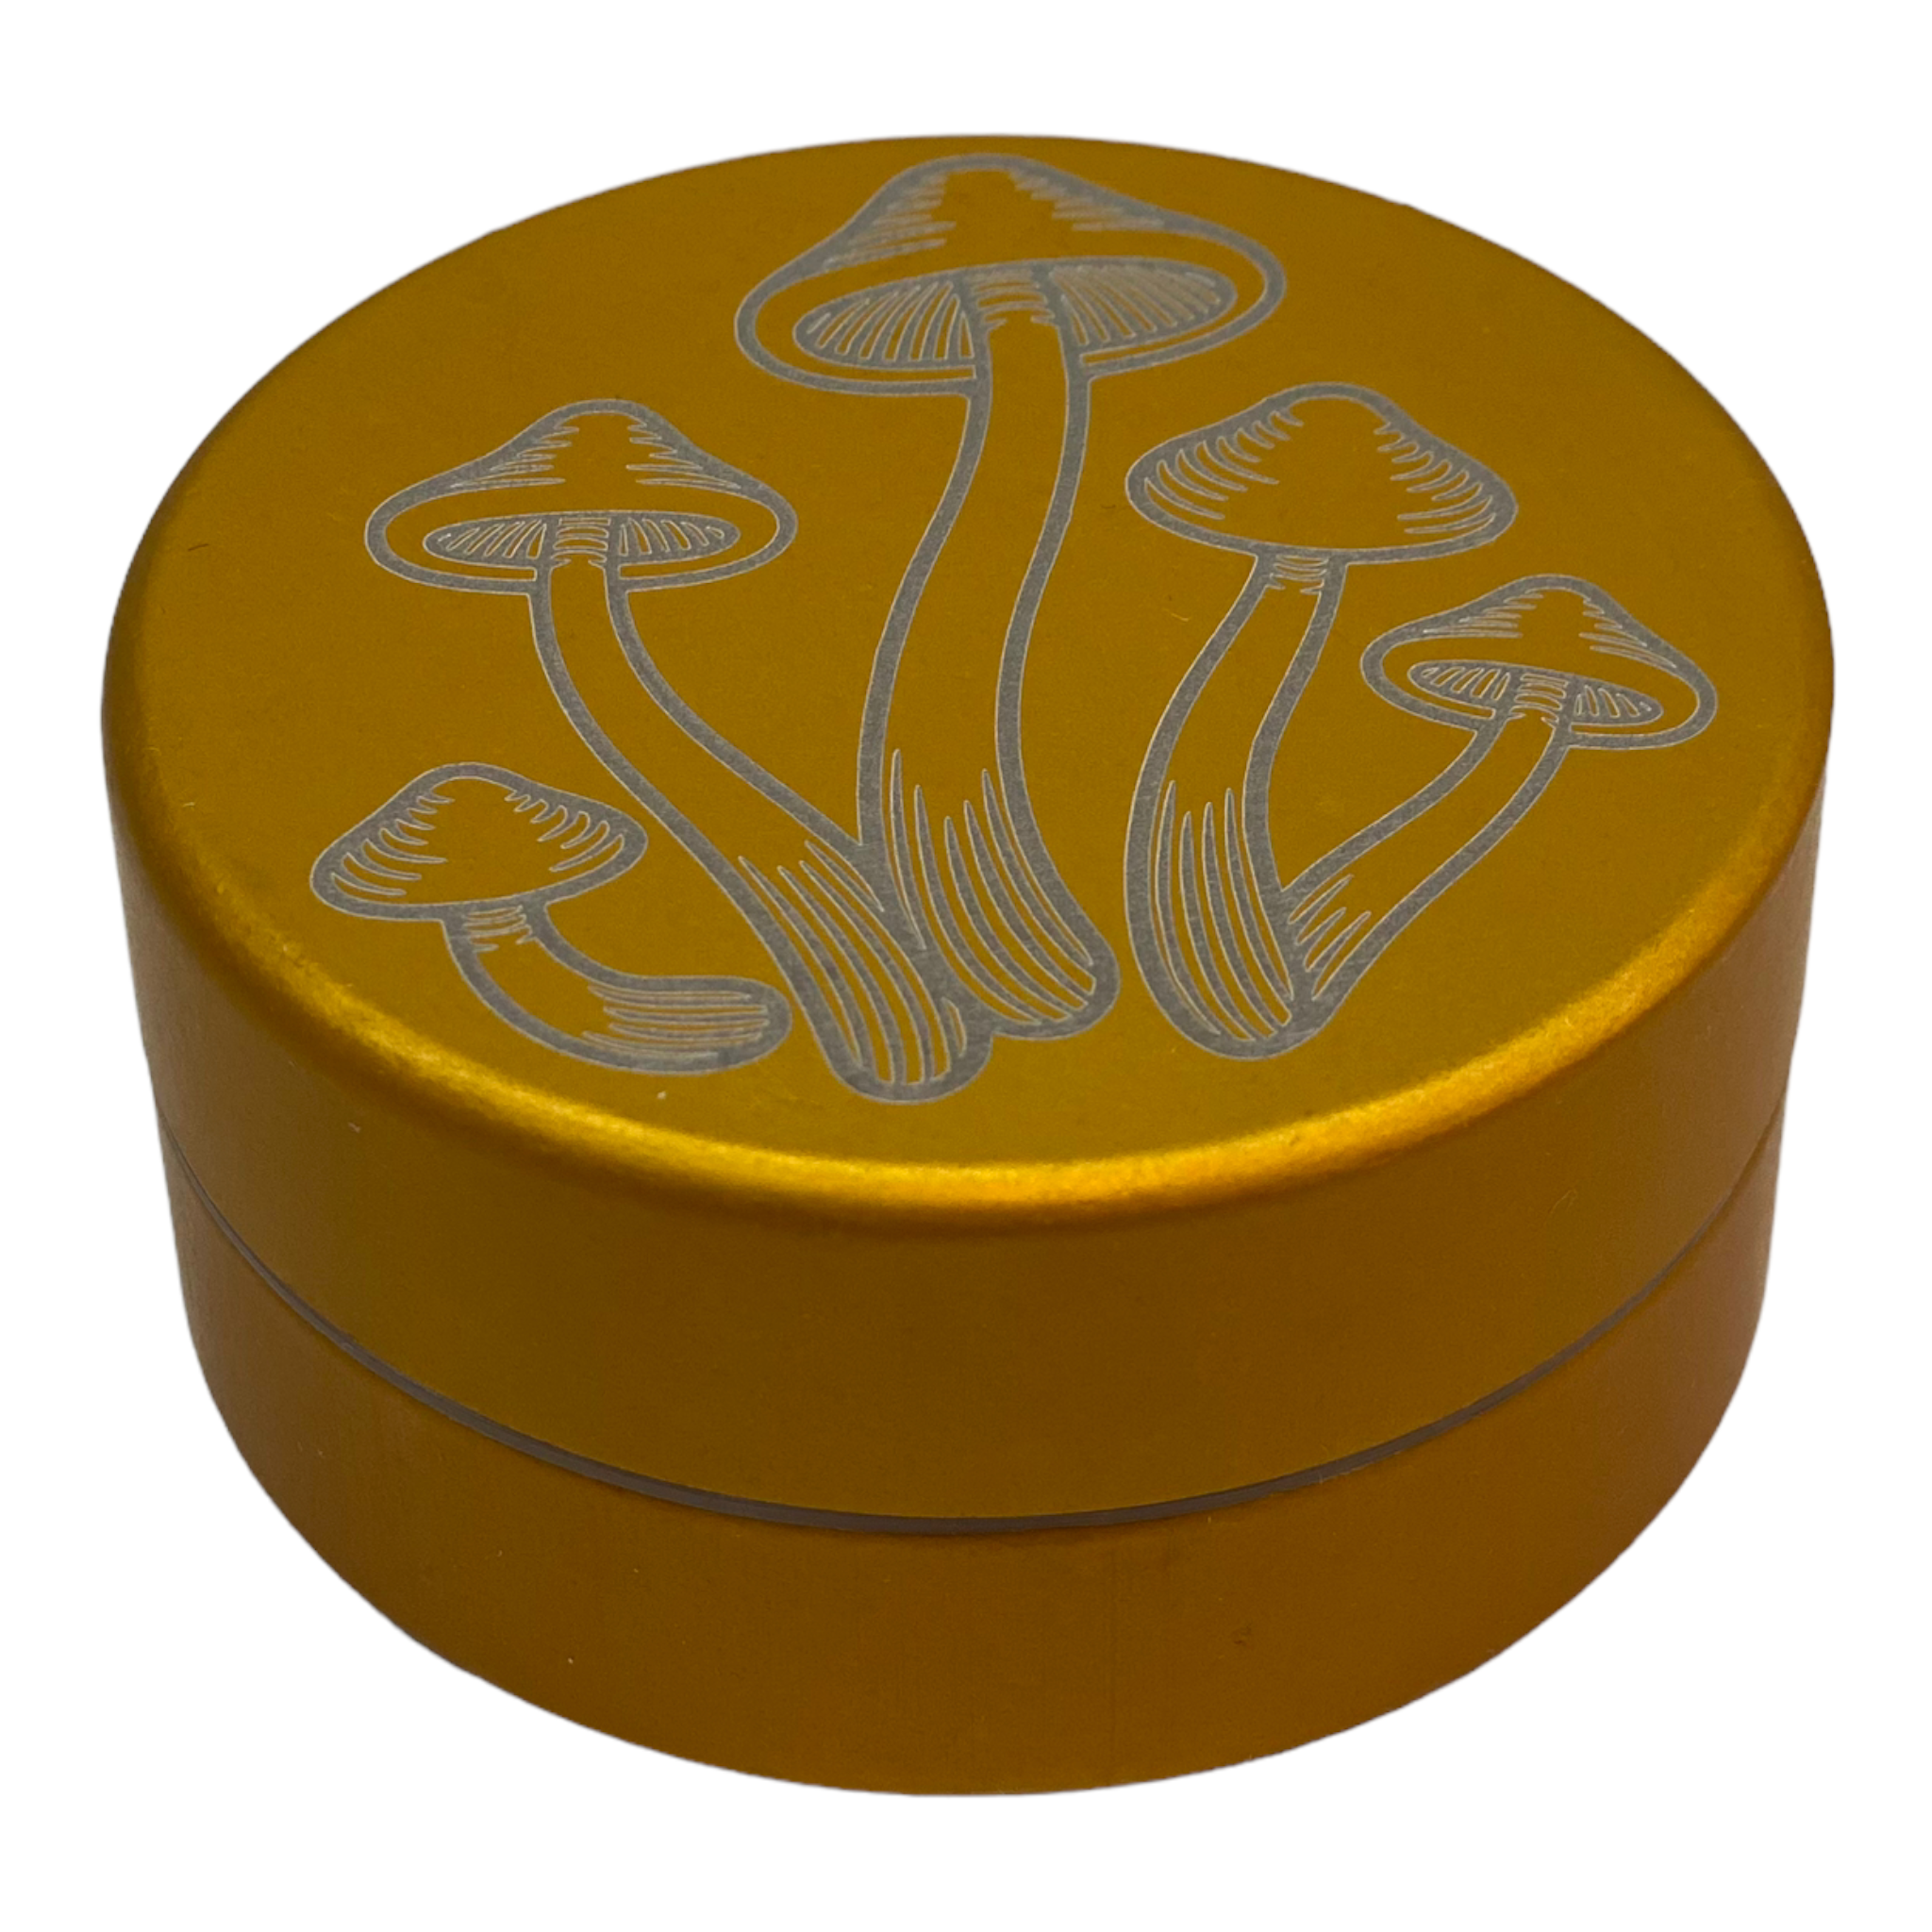 us made Tahoe Grinders Gold Anodized Aluminum Large Two Piece Herb Grinder With Cordycep Mushrooms